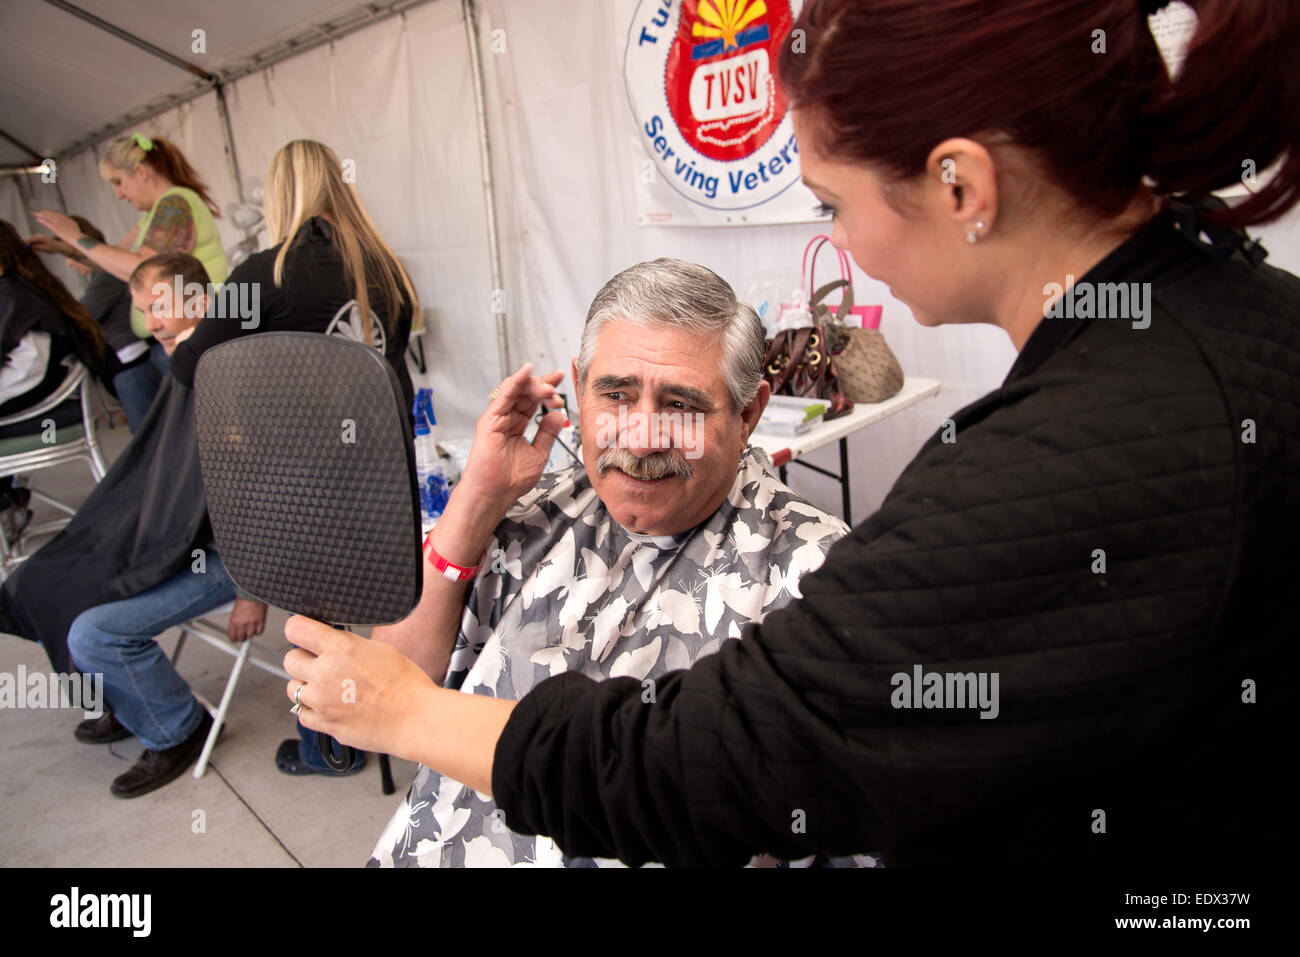 Tucson, Arizona, USA. Jan. 10, 2015. Homeless U.S. military veterans receive medical care, clothing and grooming at the 16th biannual Stand Down event hosted by Tucson Veterans Serving Veterans.  The U.S. Department of Housing and Urban Development estimated in January of 2014 that 49,933 American military veterans are homeless. Credit:  Norma Jean Gargasz/Alamy Live News Stock Photo